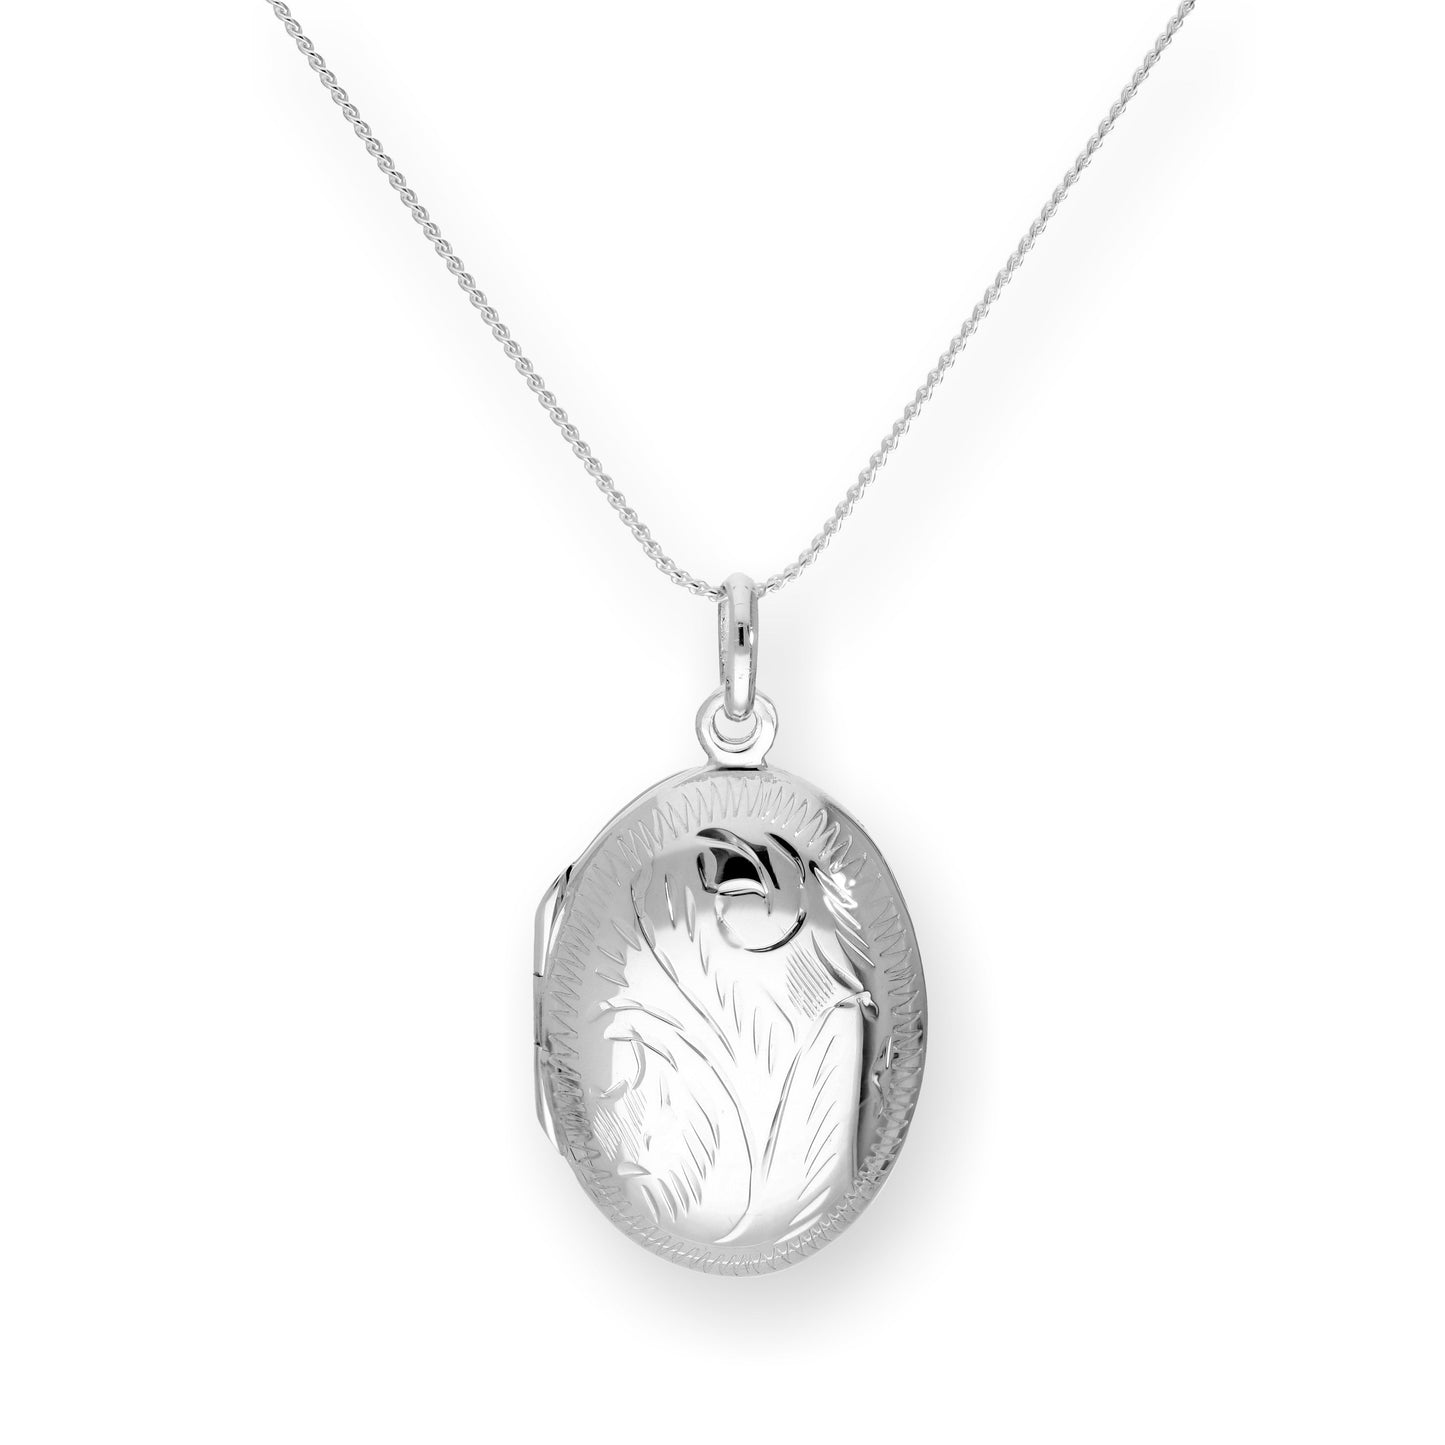 Sterling Silver Engraved Oval Locket on Chain 16 - 22 Inches